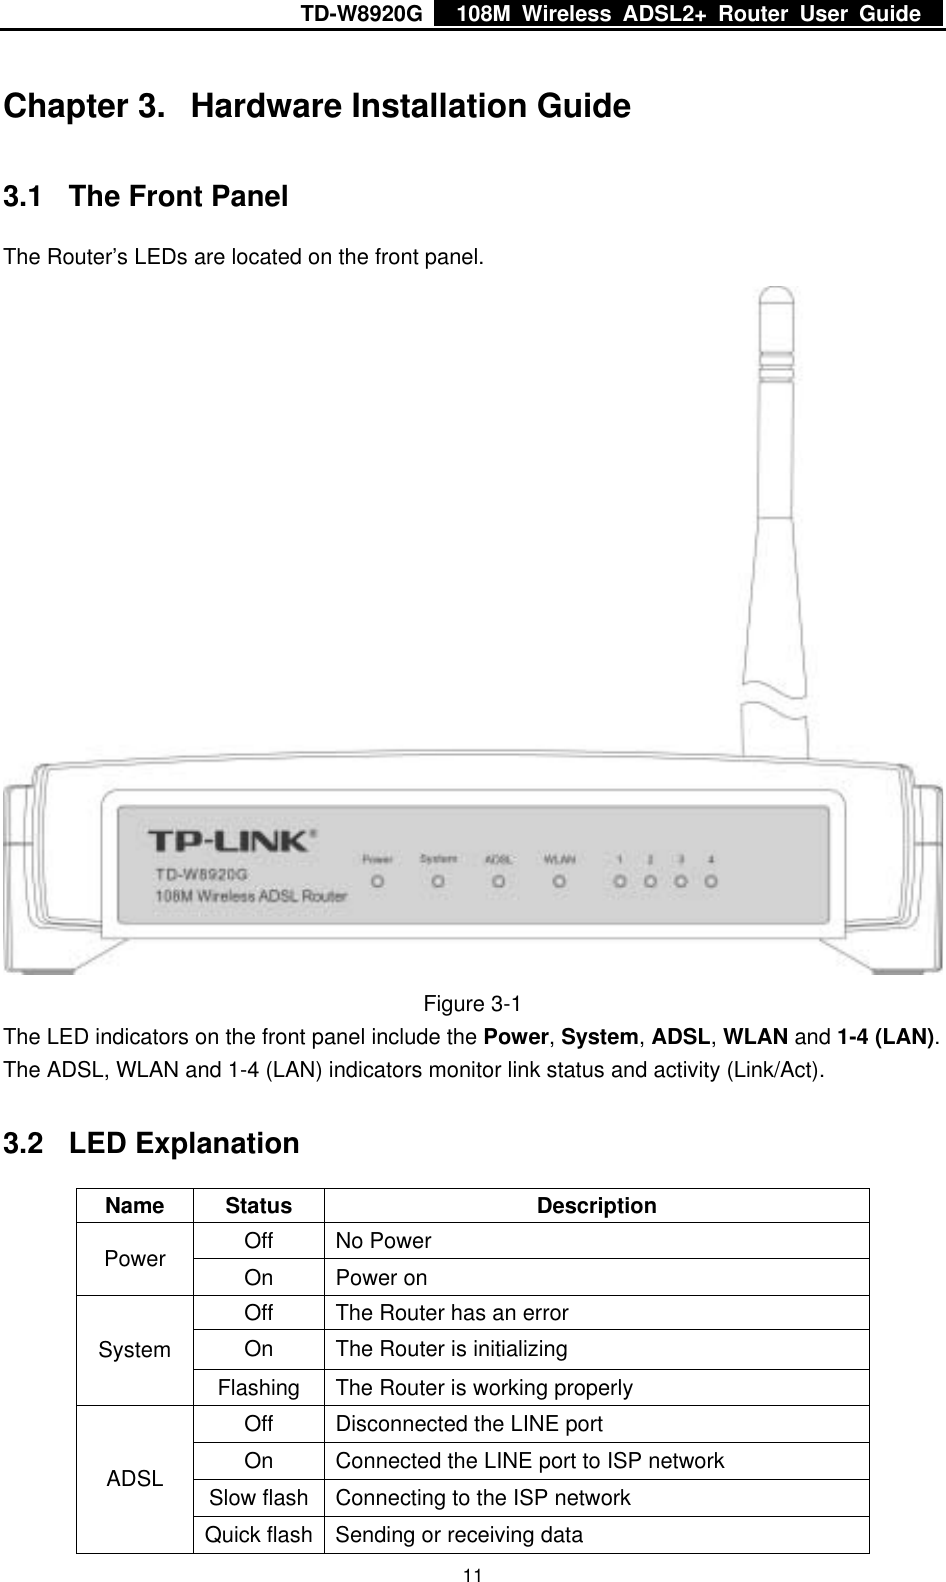 TD-W8920G    108M Wireless ADSL2+ Router User Guide    11 Chapter 3.  Hardware Installation Guide 3.1  The Front Panel The Router’s LEDs are located on the front panel.  Figure 3-1 The LED indicators on the front panel include the Power, System, ADSL, WLAN and 1-4 (LAN). The ADSL, WLAN and 1-4 (LAN) indicators monitor link status and activity (Link/Act). 3.2 LED Explanation Name Status  Description Off No Power Power  On Power on Off  The Router has an error On  The Router is initializing System Flashing  The Router is working properly Off  Disconnected the LINE port On    Connected the LINE port to ISP network   Slow flash  Connecting to the ISP network ADSL Quick flash  Sending or receiving data 